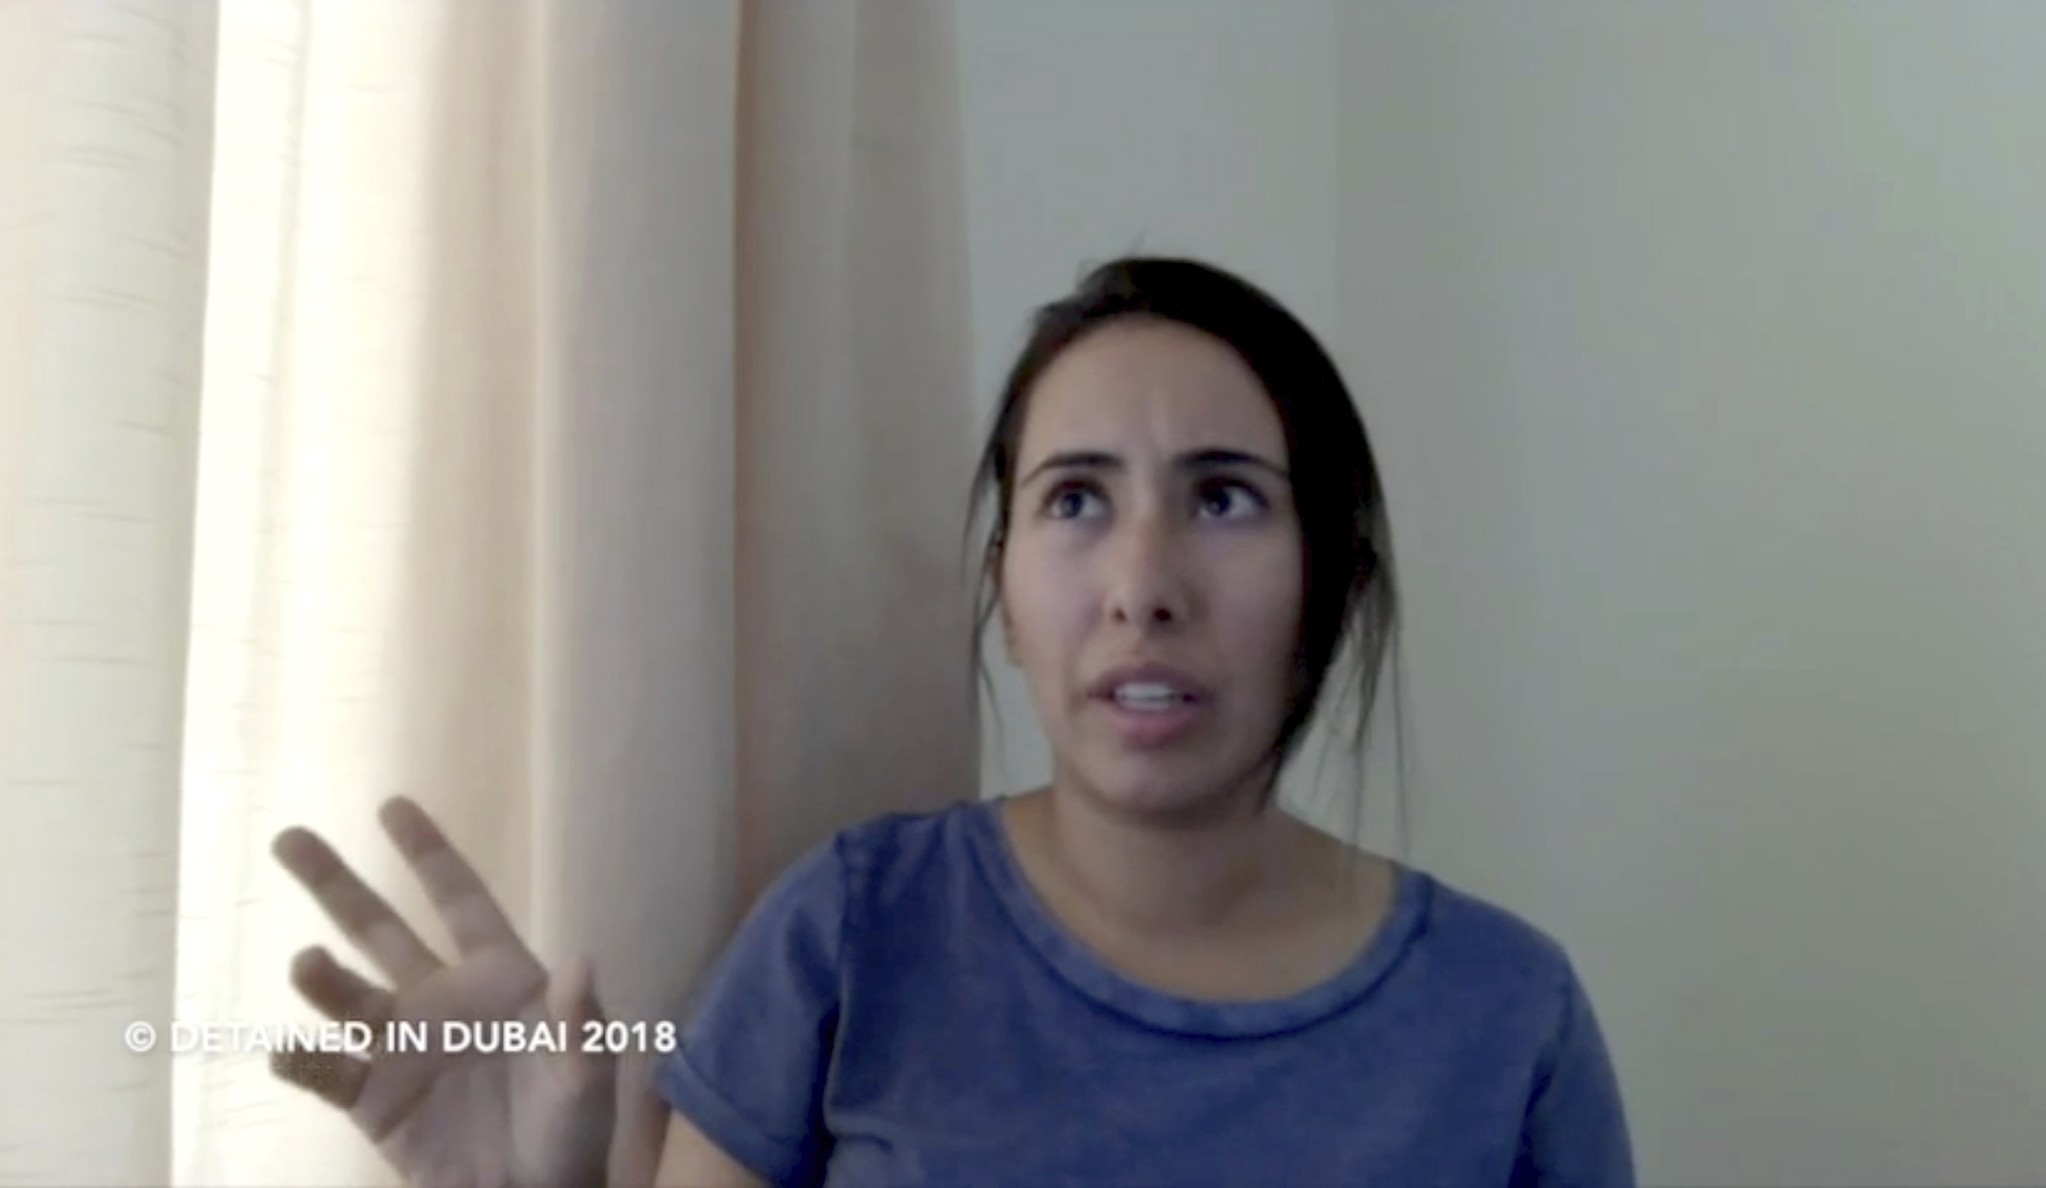  This undated image from video provided by Detained in Dubai shows Sheikha Latifa bint Mohammed Al Maktoum. (AP Photo)